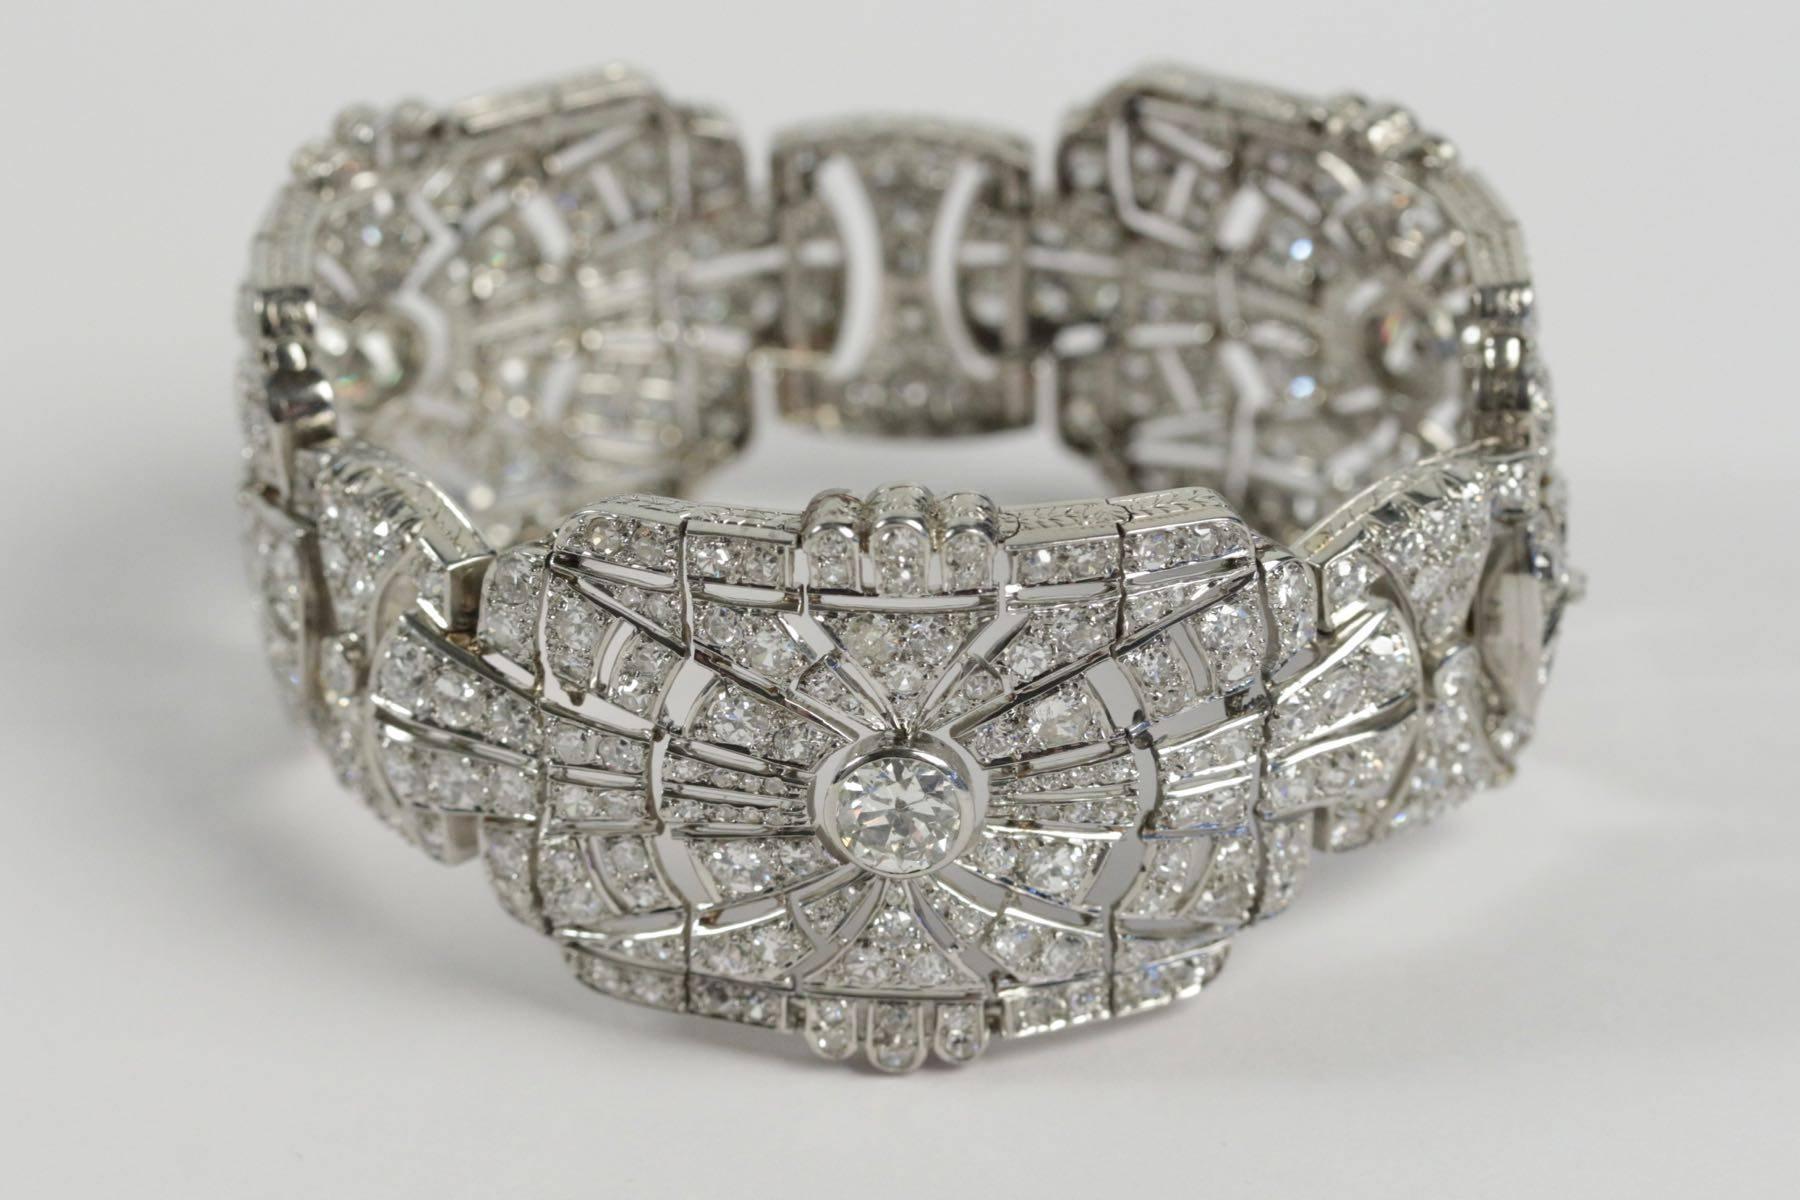 Art Deco gold and platinum bracelet set with brillant cut diamond (total weight estimated approximately 15 ct). French work. Circa 1920.